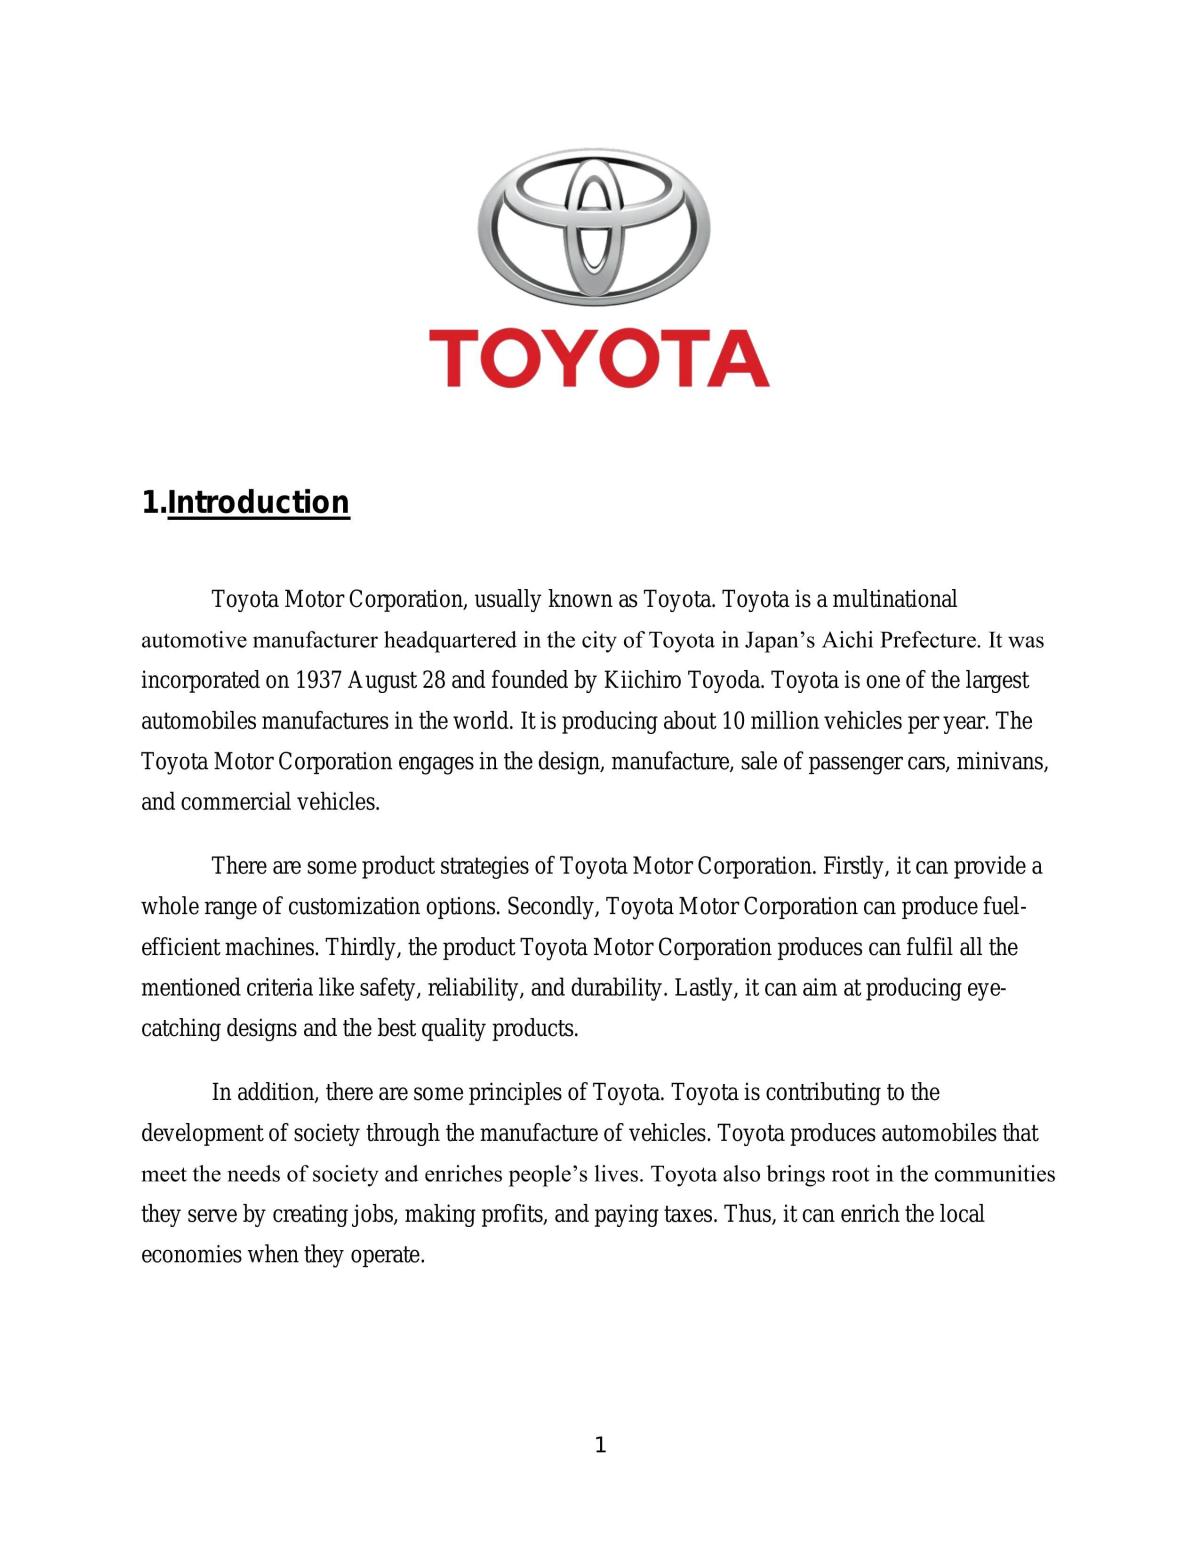 T1_Toyota_Written_Assignment - Page 2